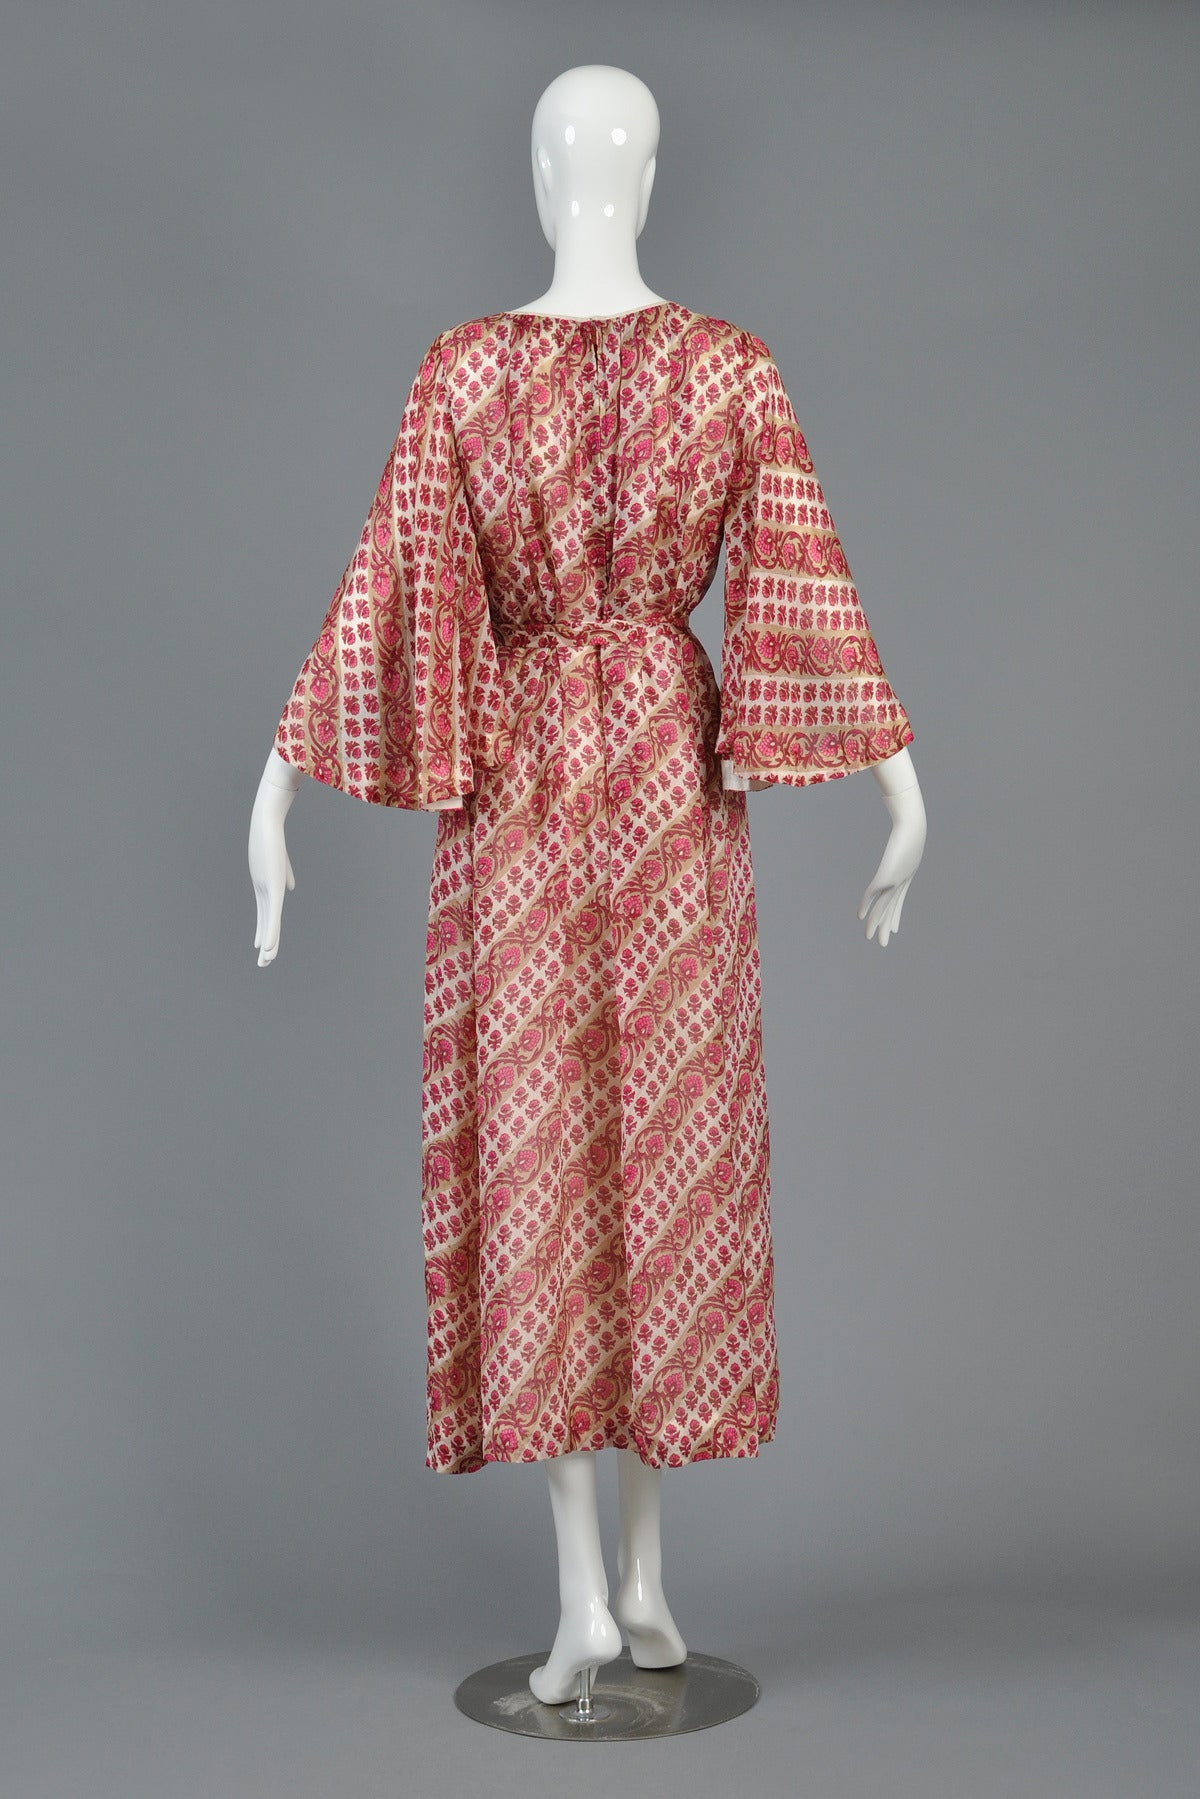 1970s Neiman Marcus Indian Silk Maxi Dress with Bell Sleeves 6